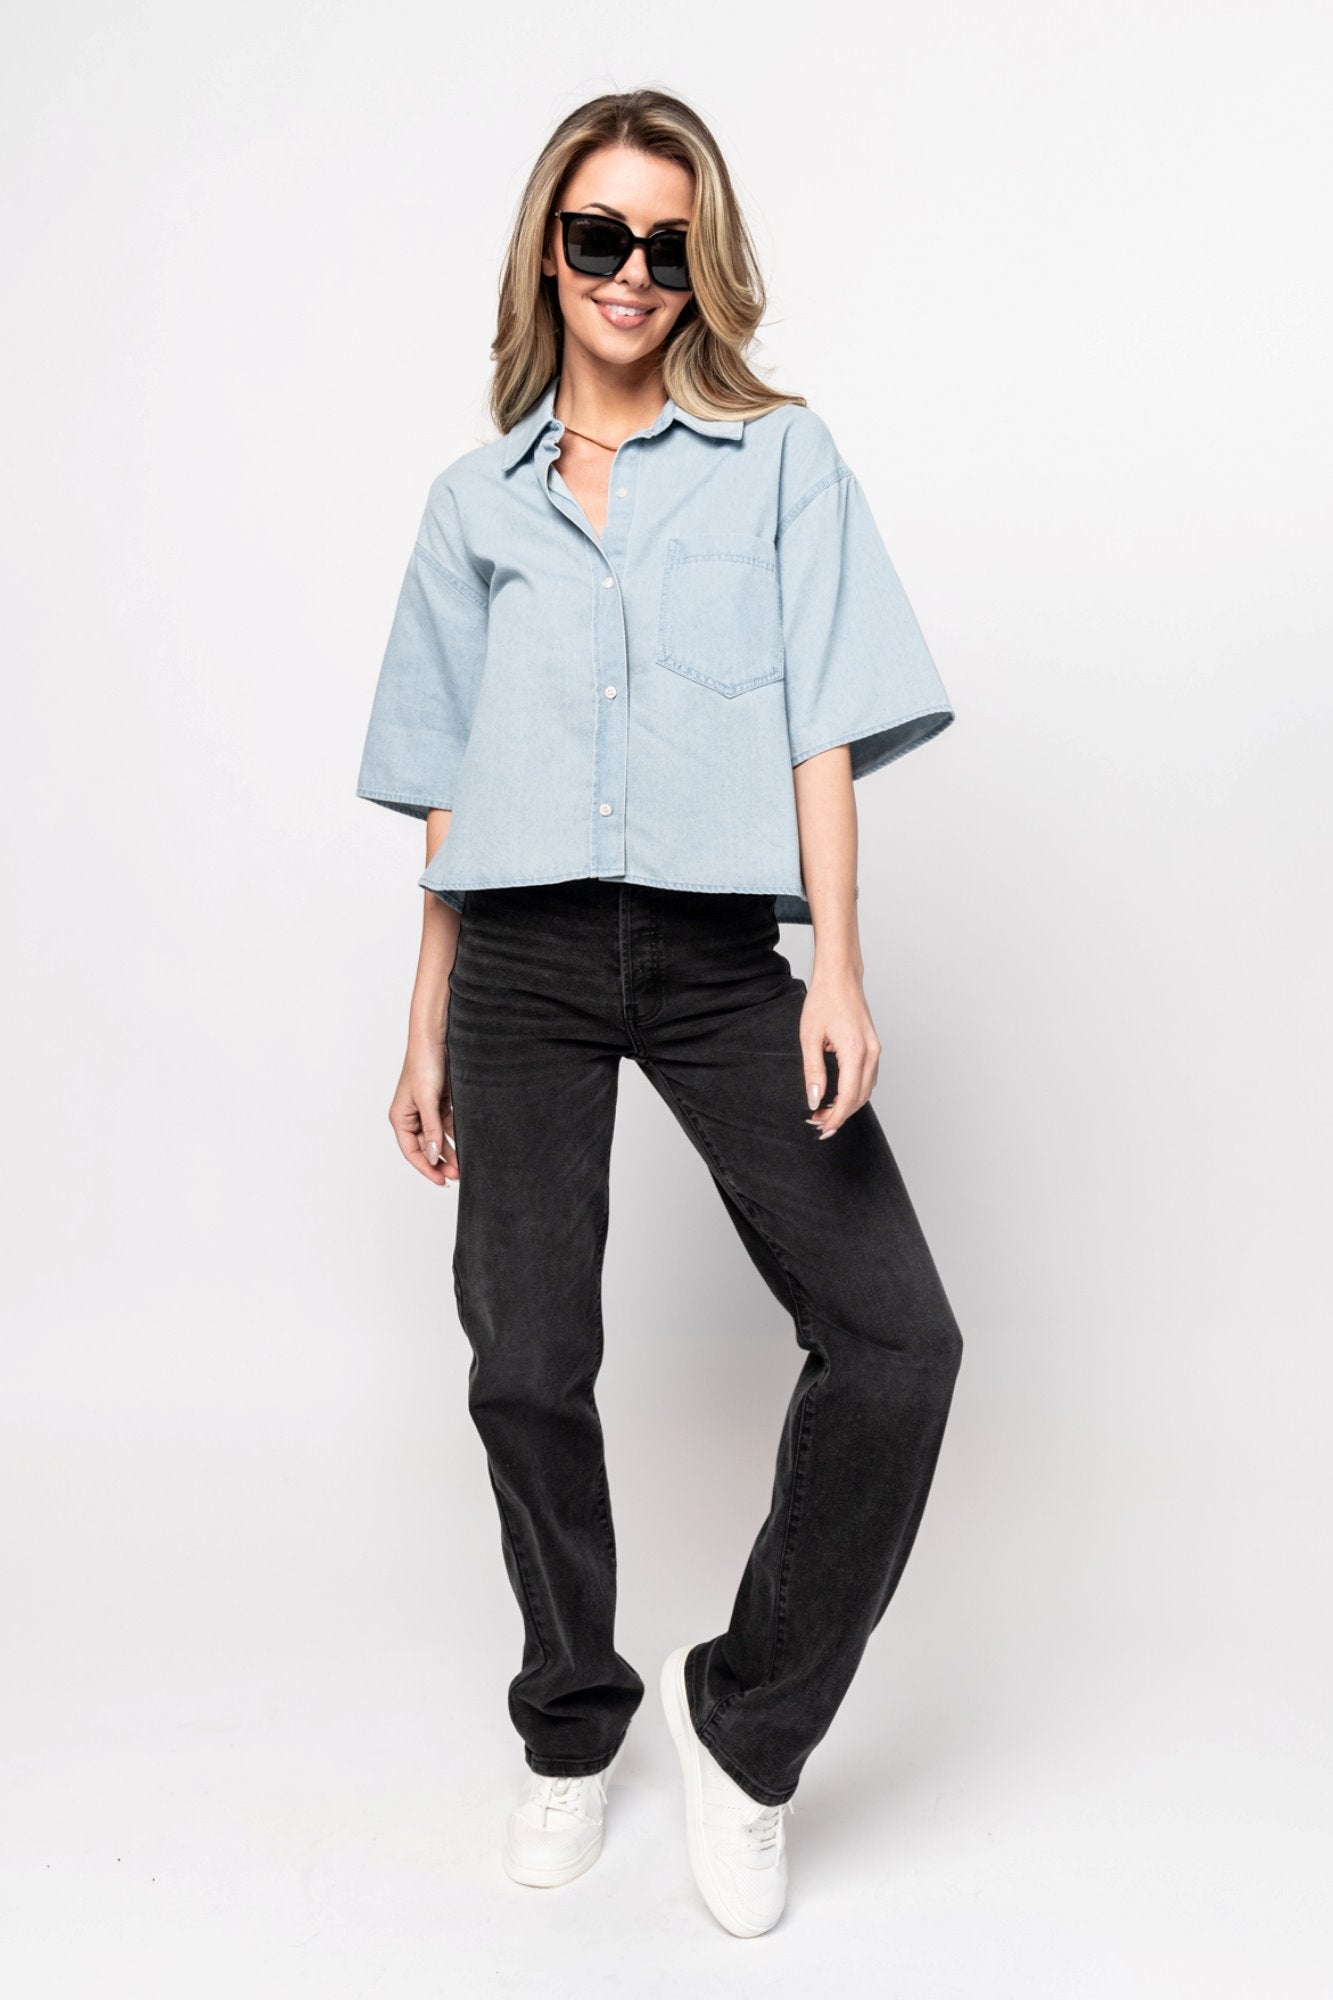 Brooks Jeans Clothing Holley Girl 